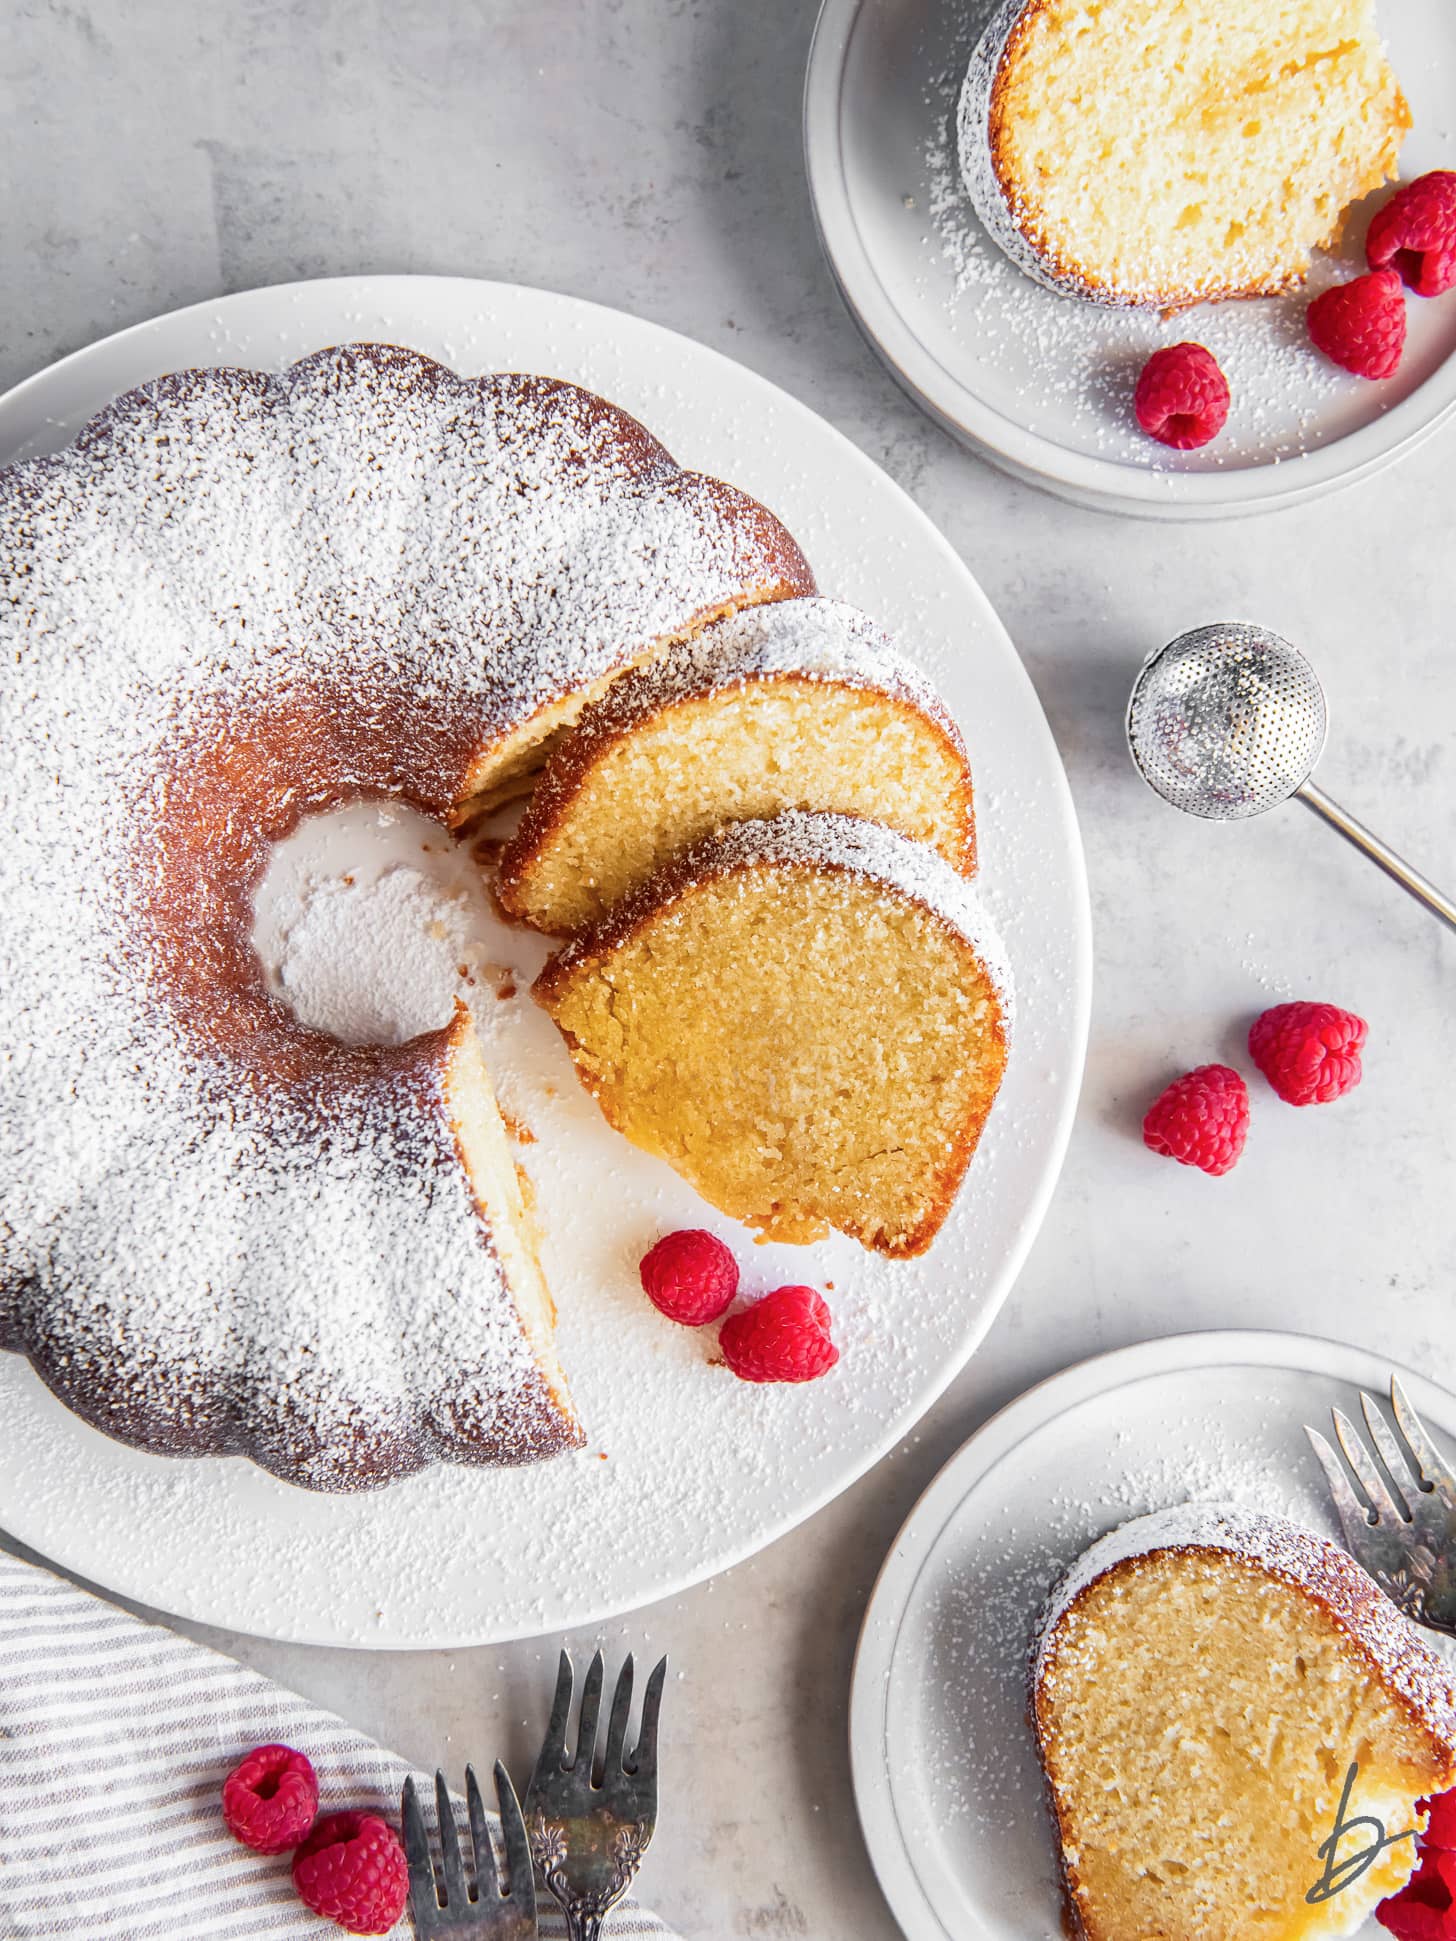 kentucky butter cake dusted with confectioners' sugar with a few slices cut and garnished with raspberries.